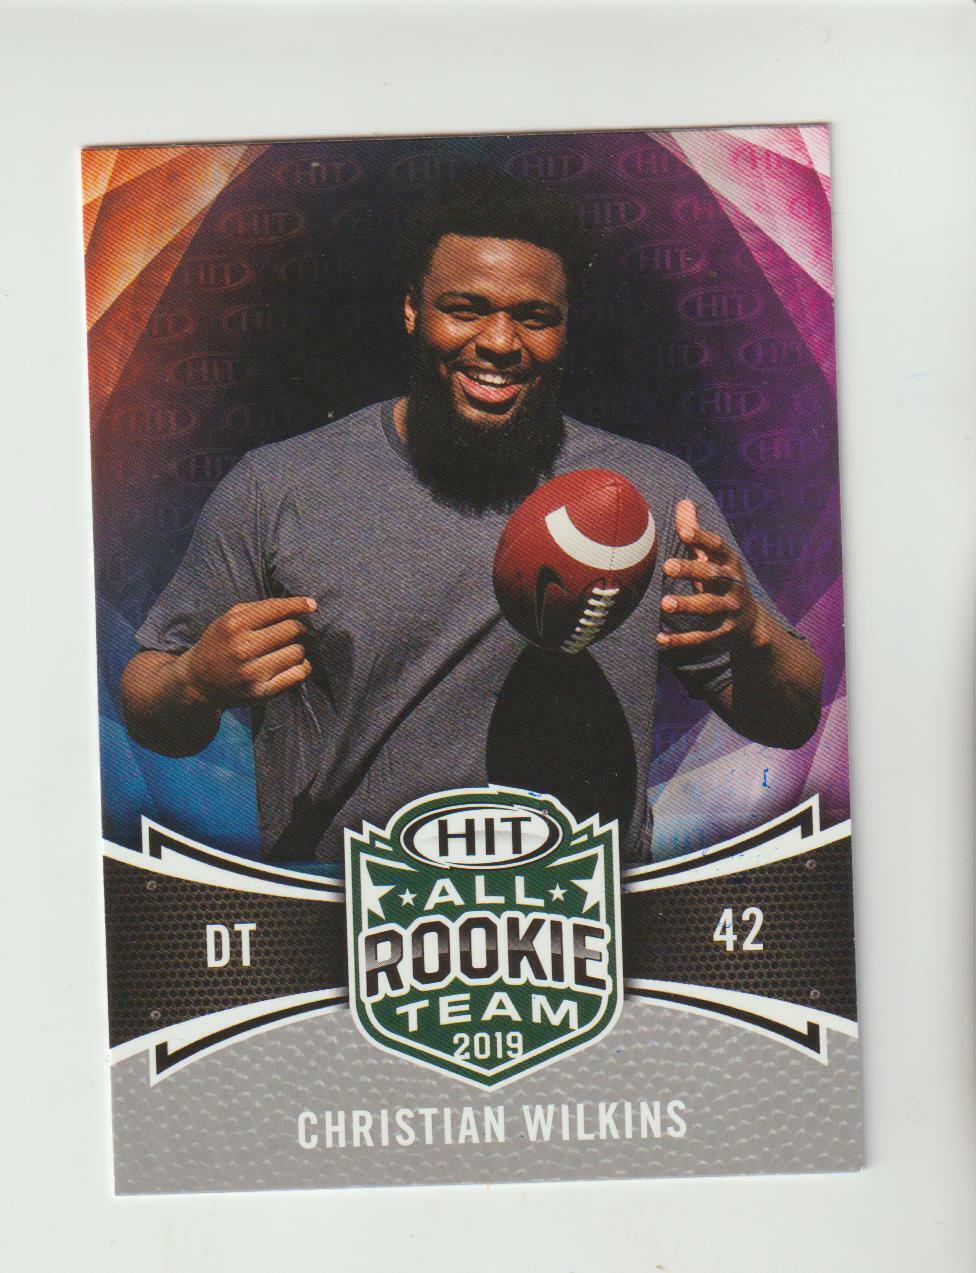 2019 SAGE Hit #140 Christian Wilkins rookie card, Miami Dolphins